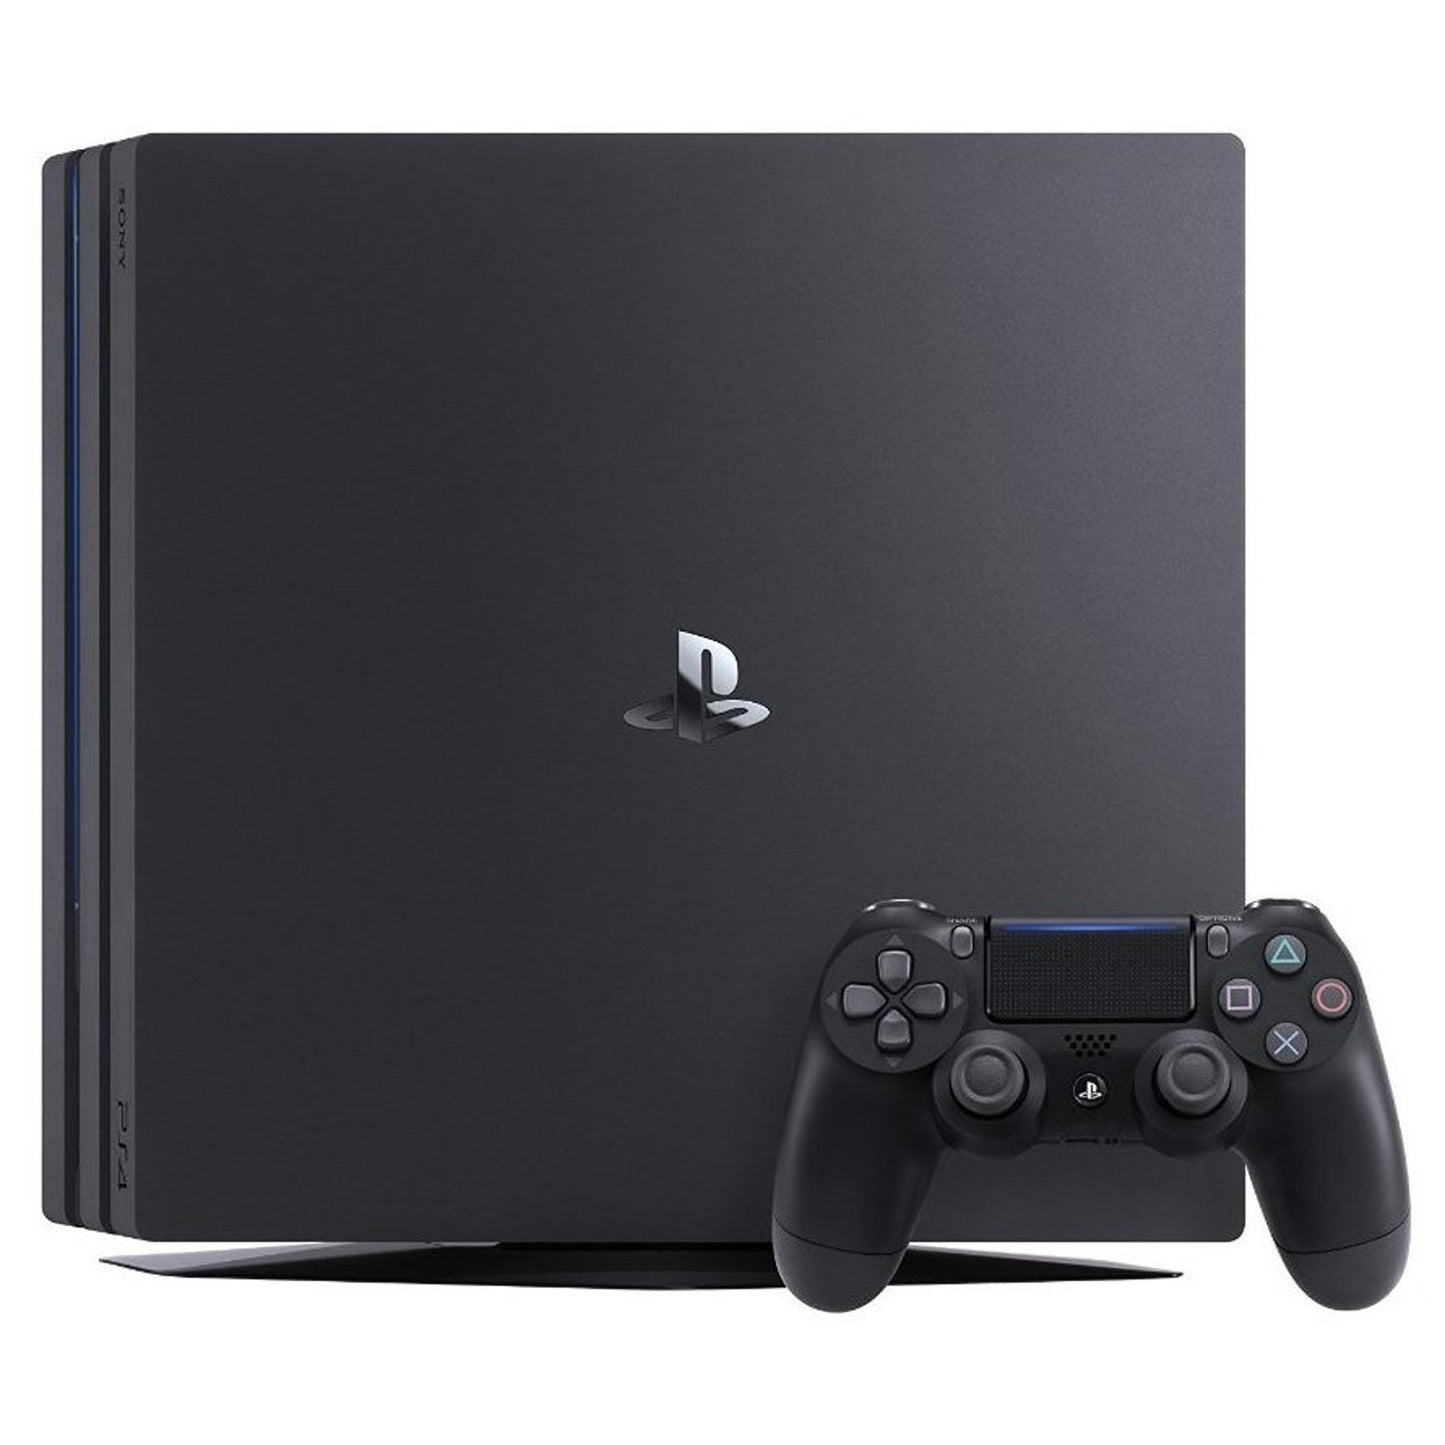 Sony Playstation 4 pro 1TB Black with 1 Controller and 4 Games